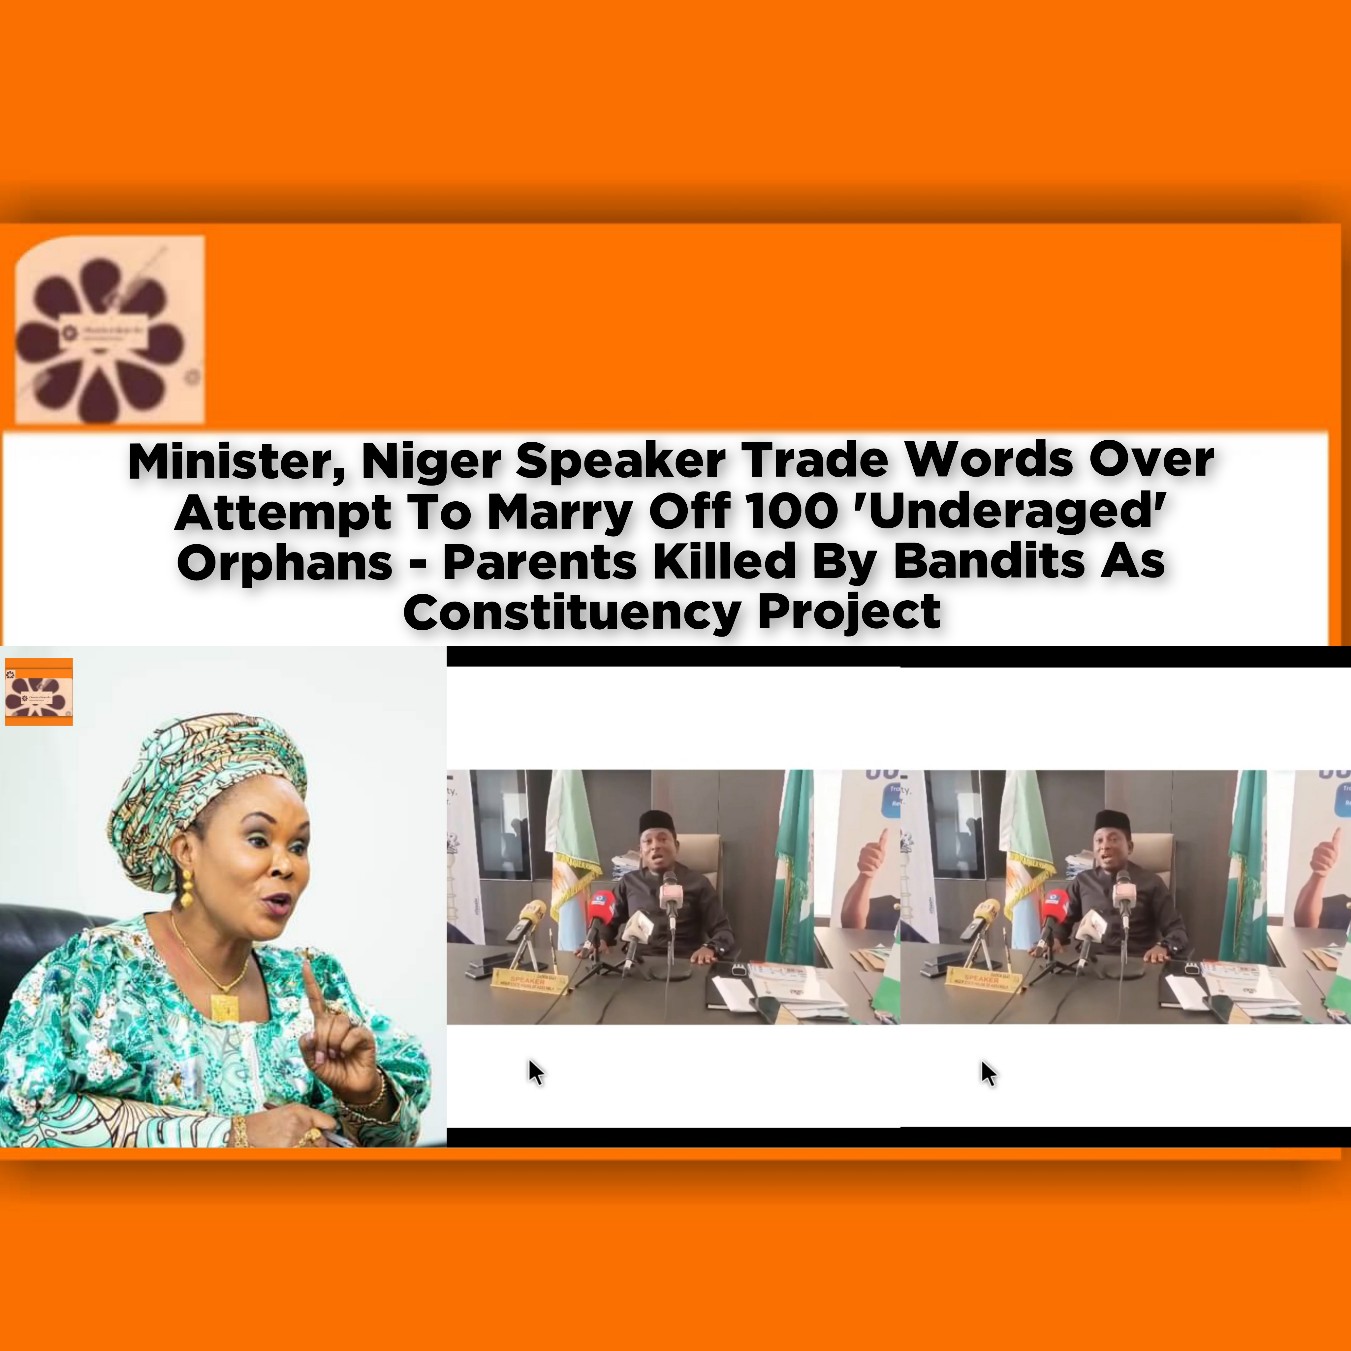 Minister, Niger Speaker Trade Words Over Attempt To Marry Off 100 'Underaged' Orphans - Parents Killed By Bandits As Constituency Project ~ OsazuwaAkonedo #PEPC